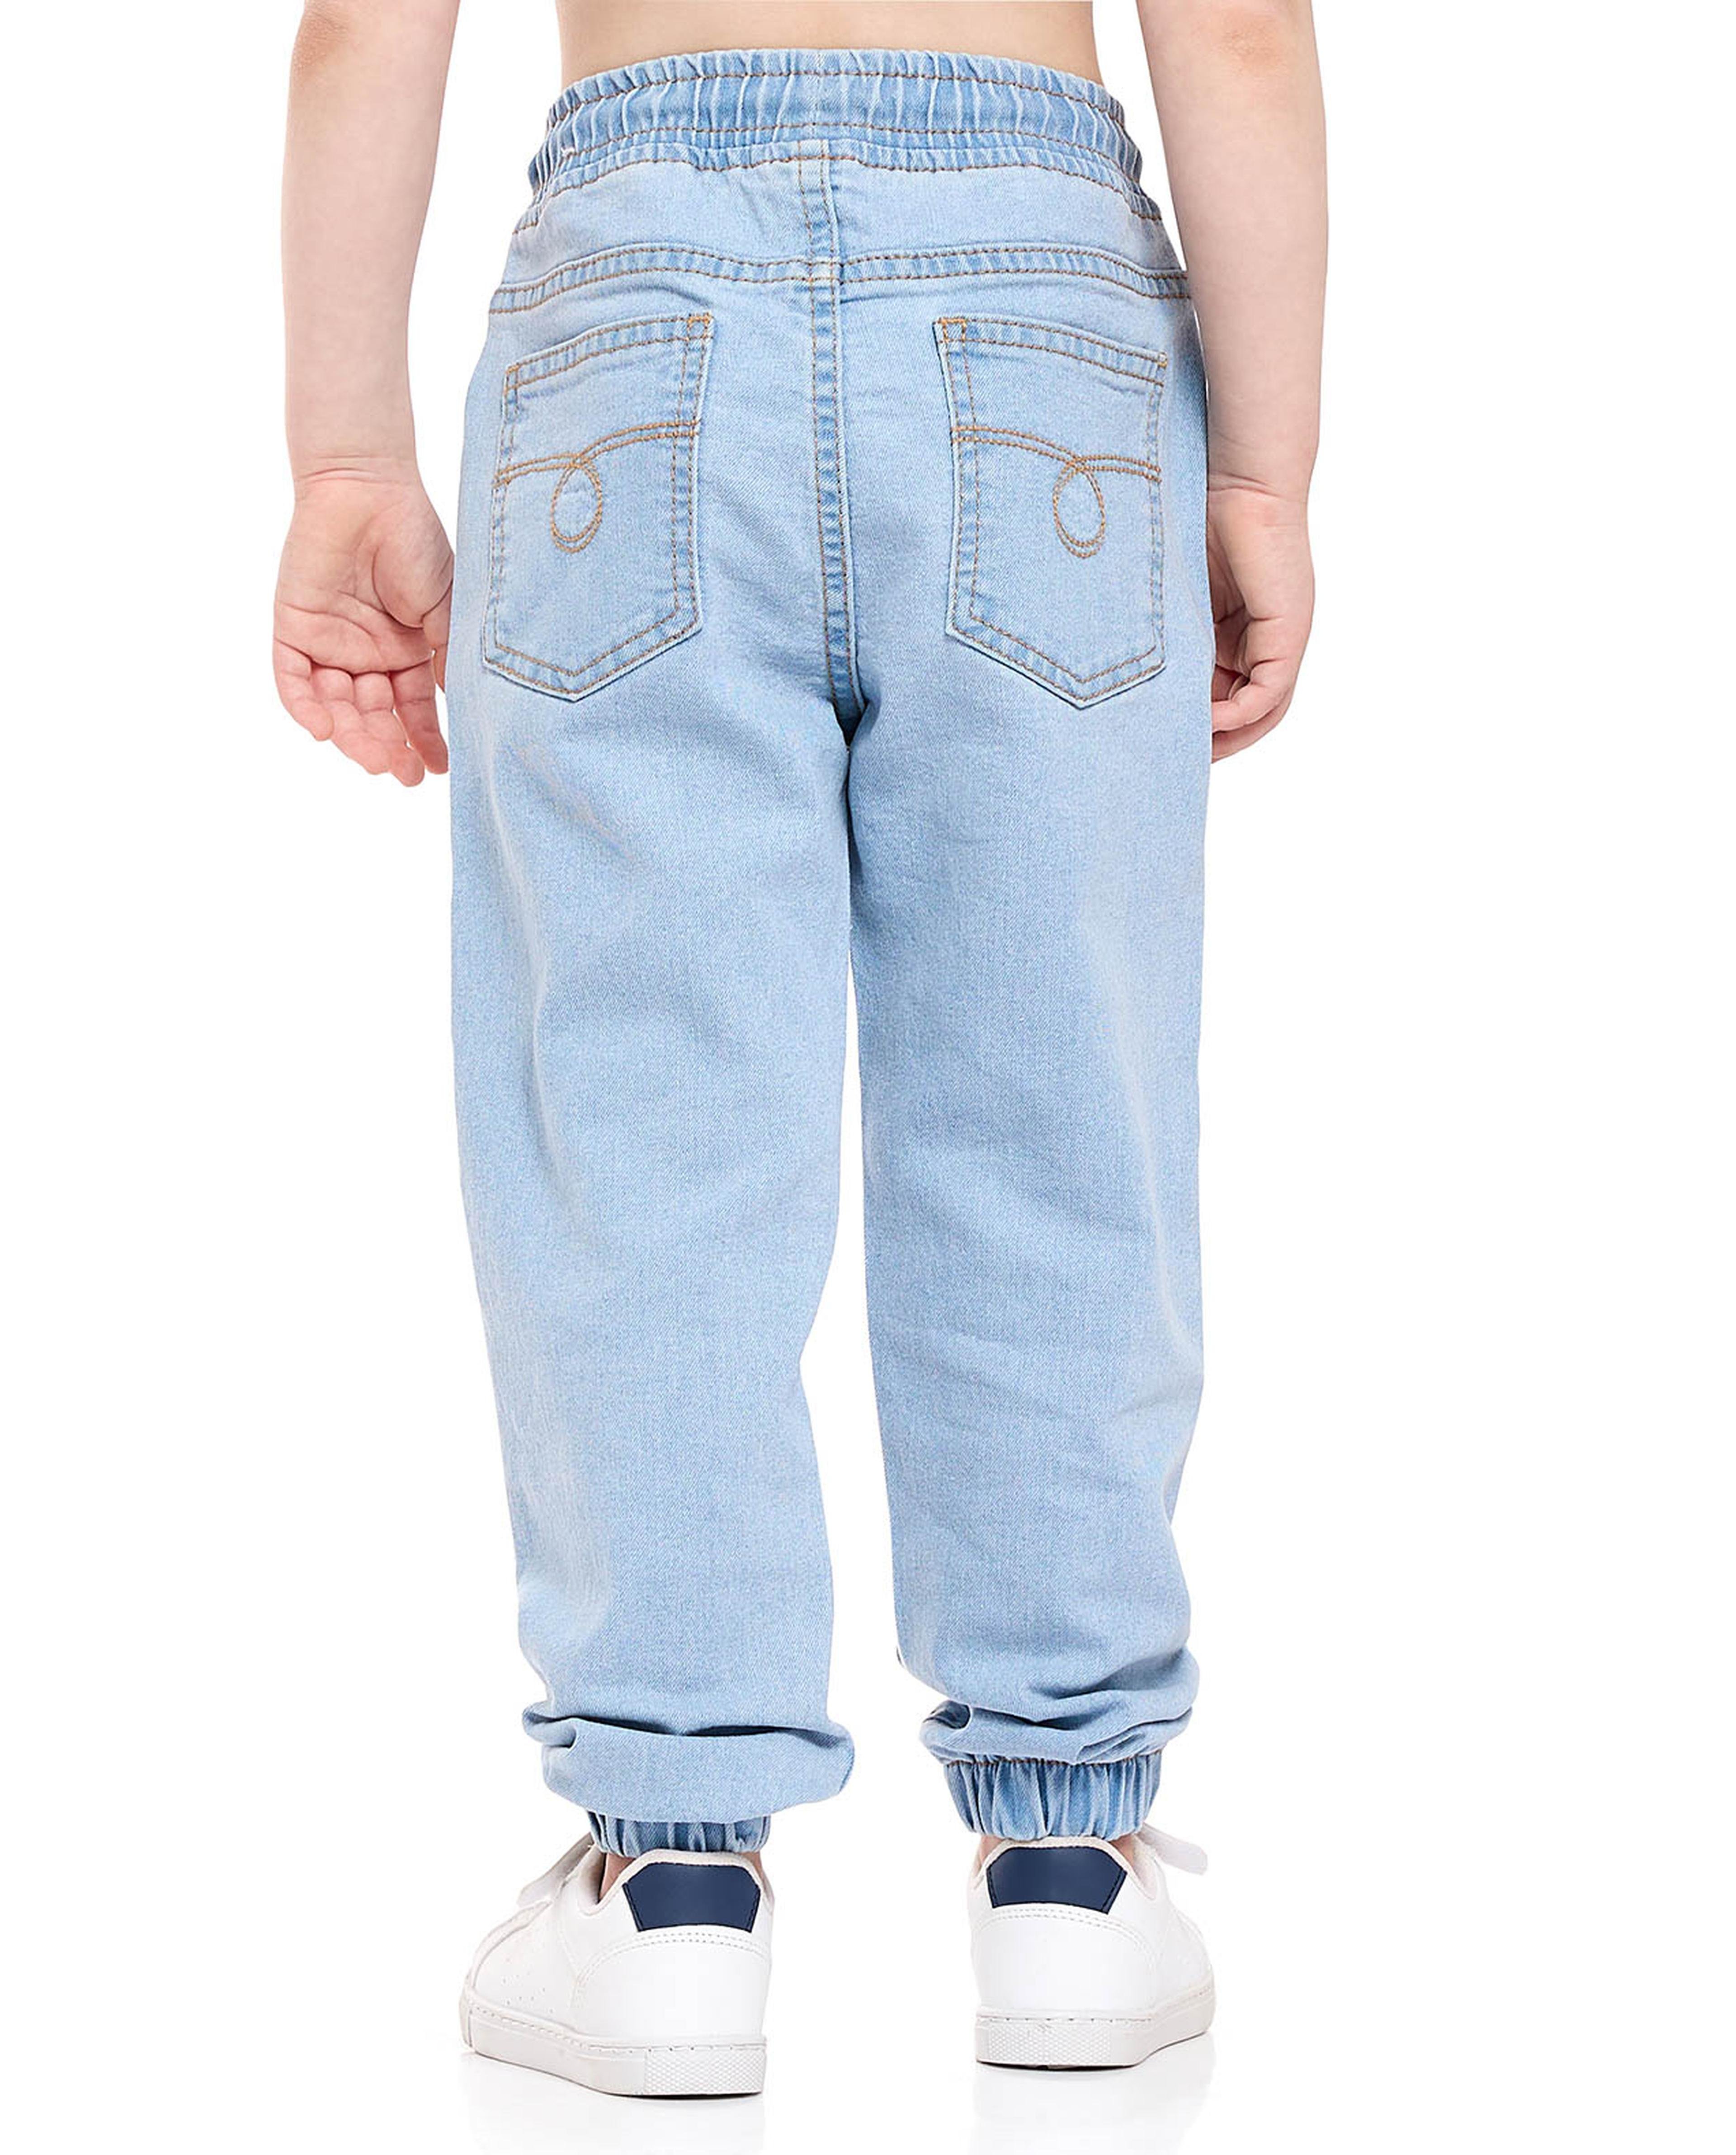 Faded Jogger Jeans with Drawstring Waist